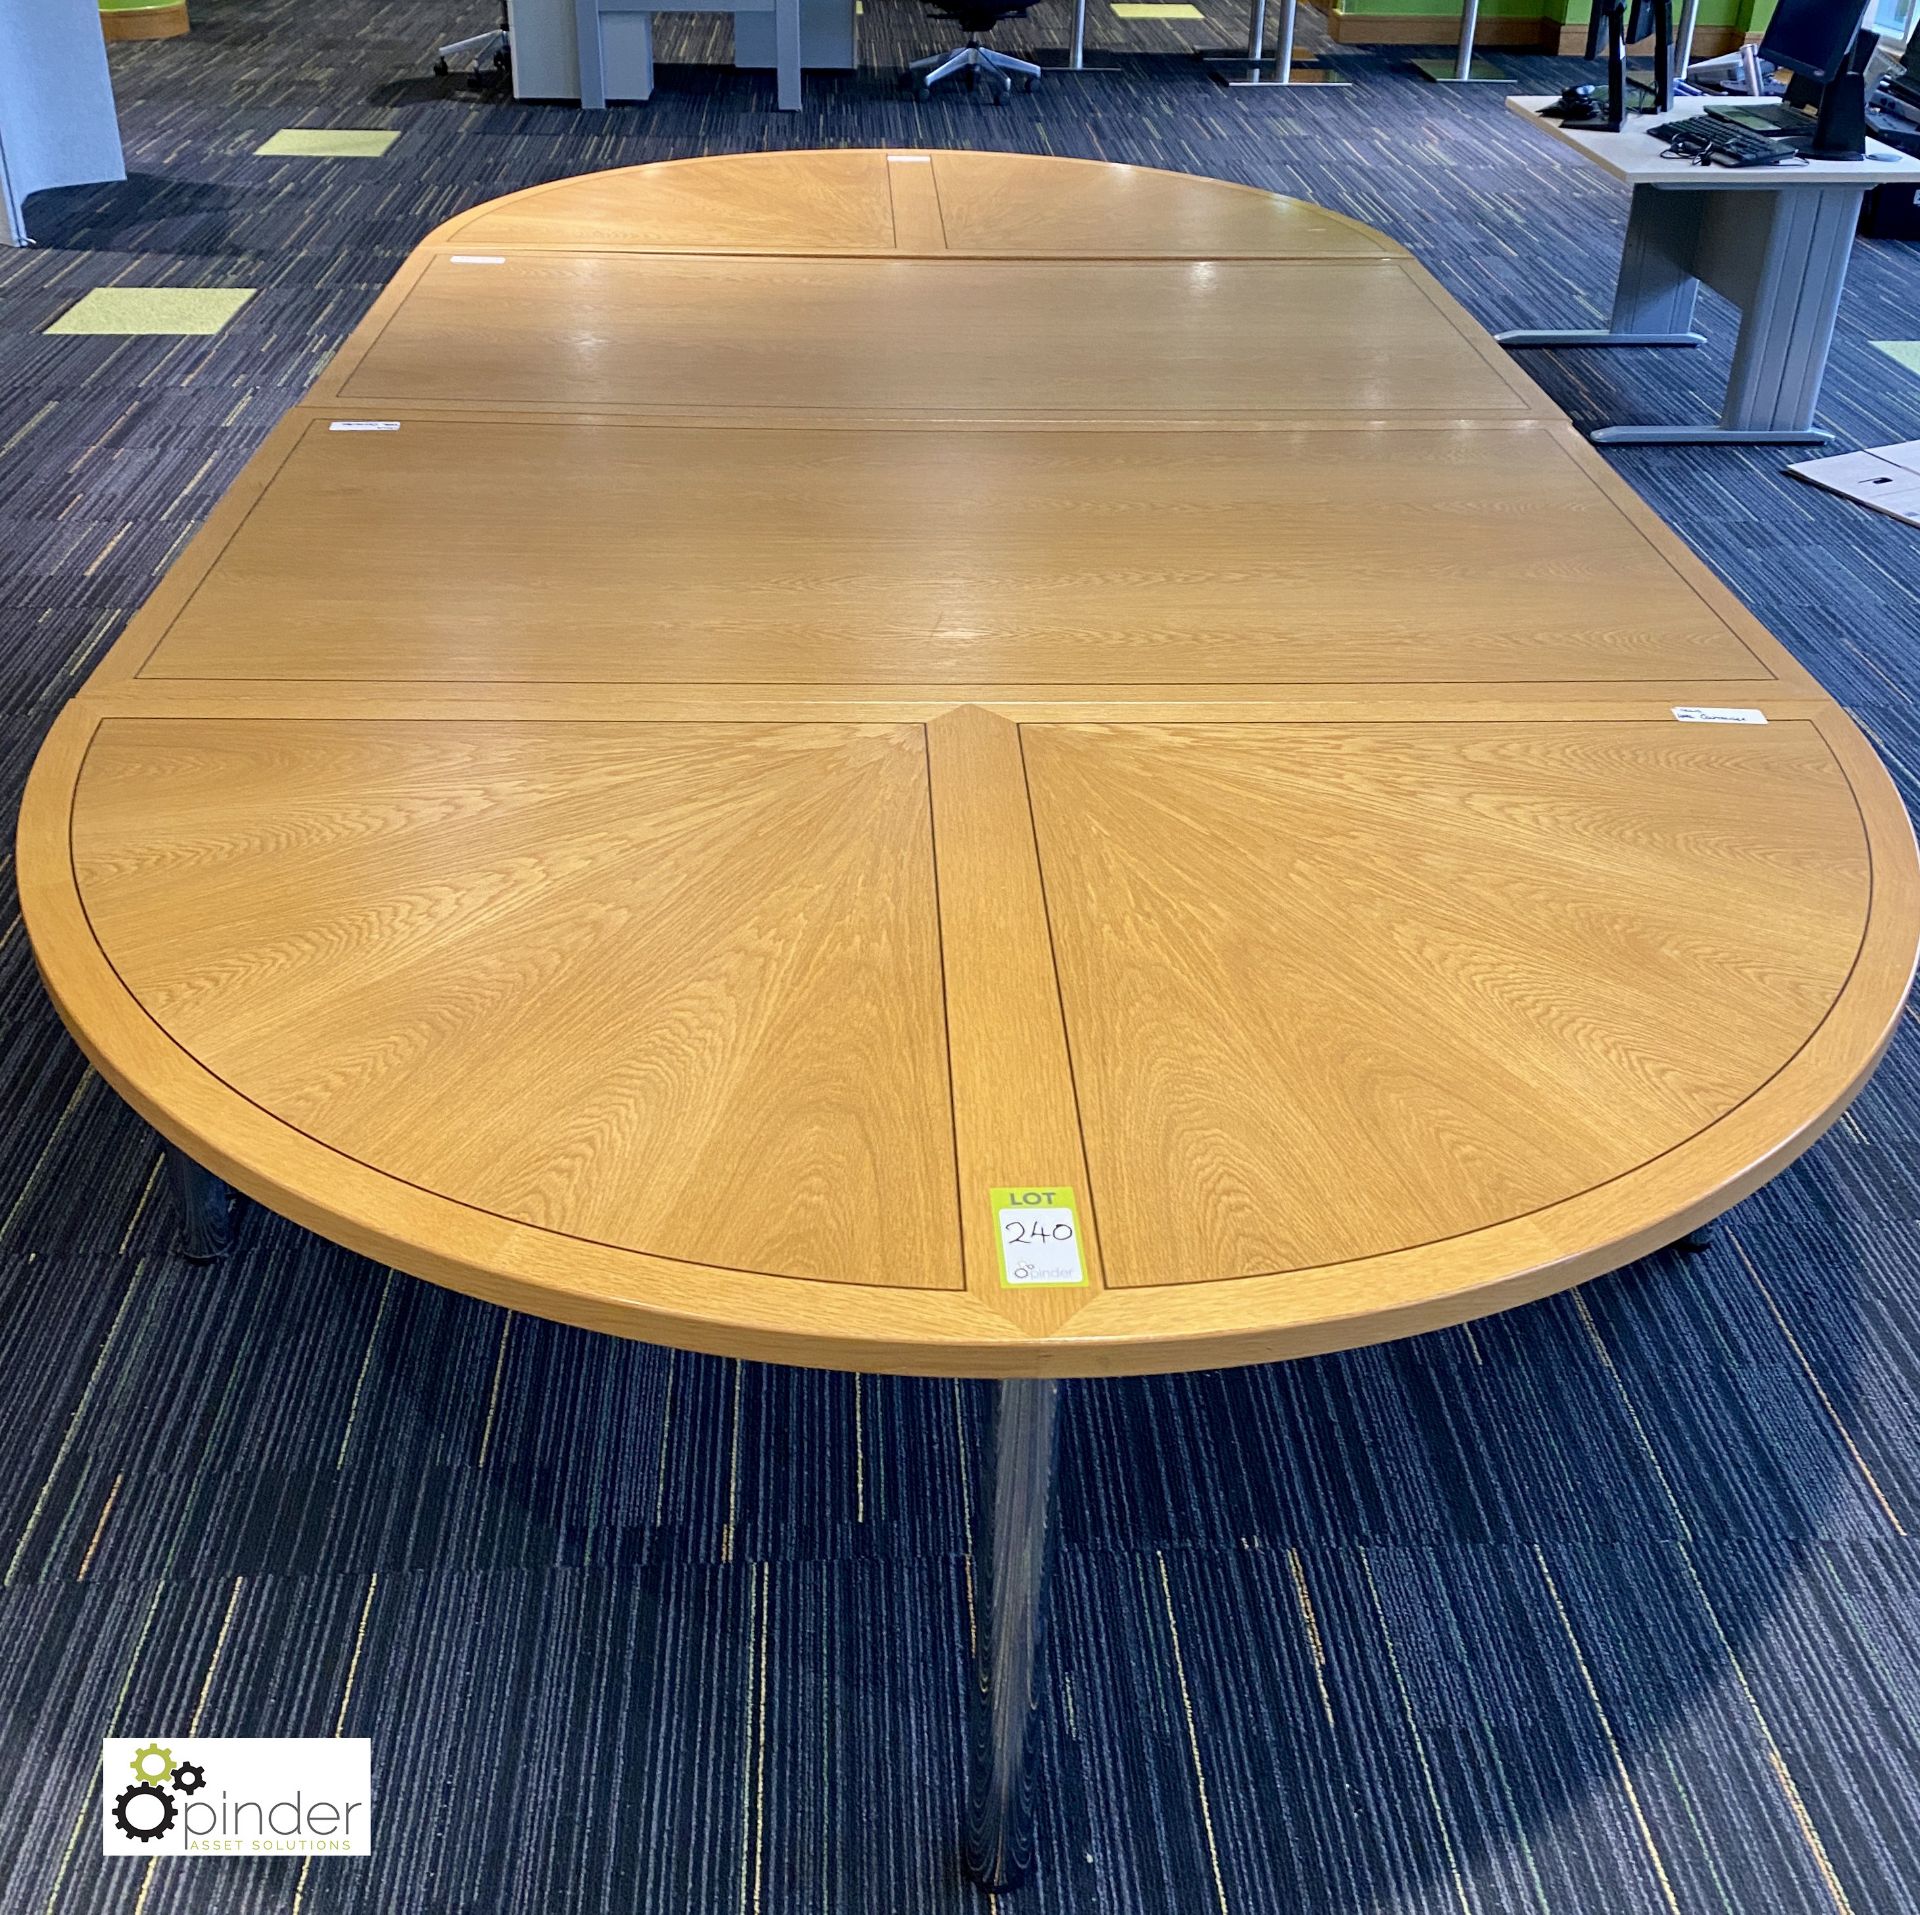 Light oak inlaid 4-section Boardroom Table, total overall dimension 4000mm x 2000mm - Image 4 of 8